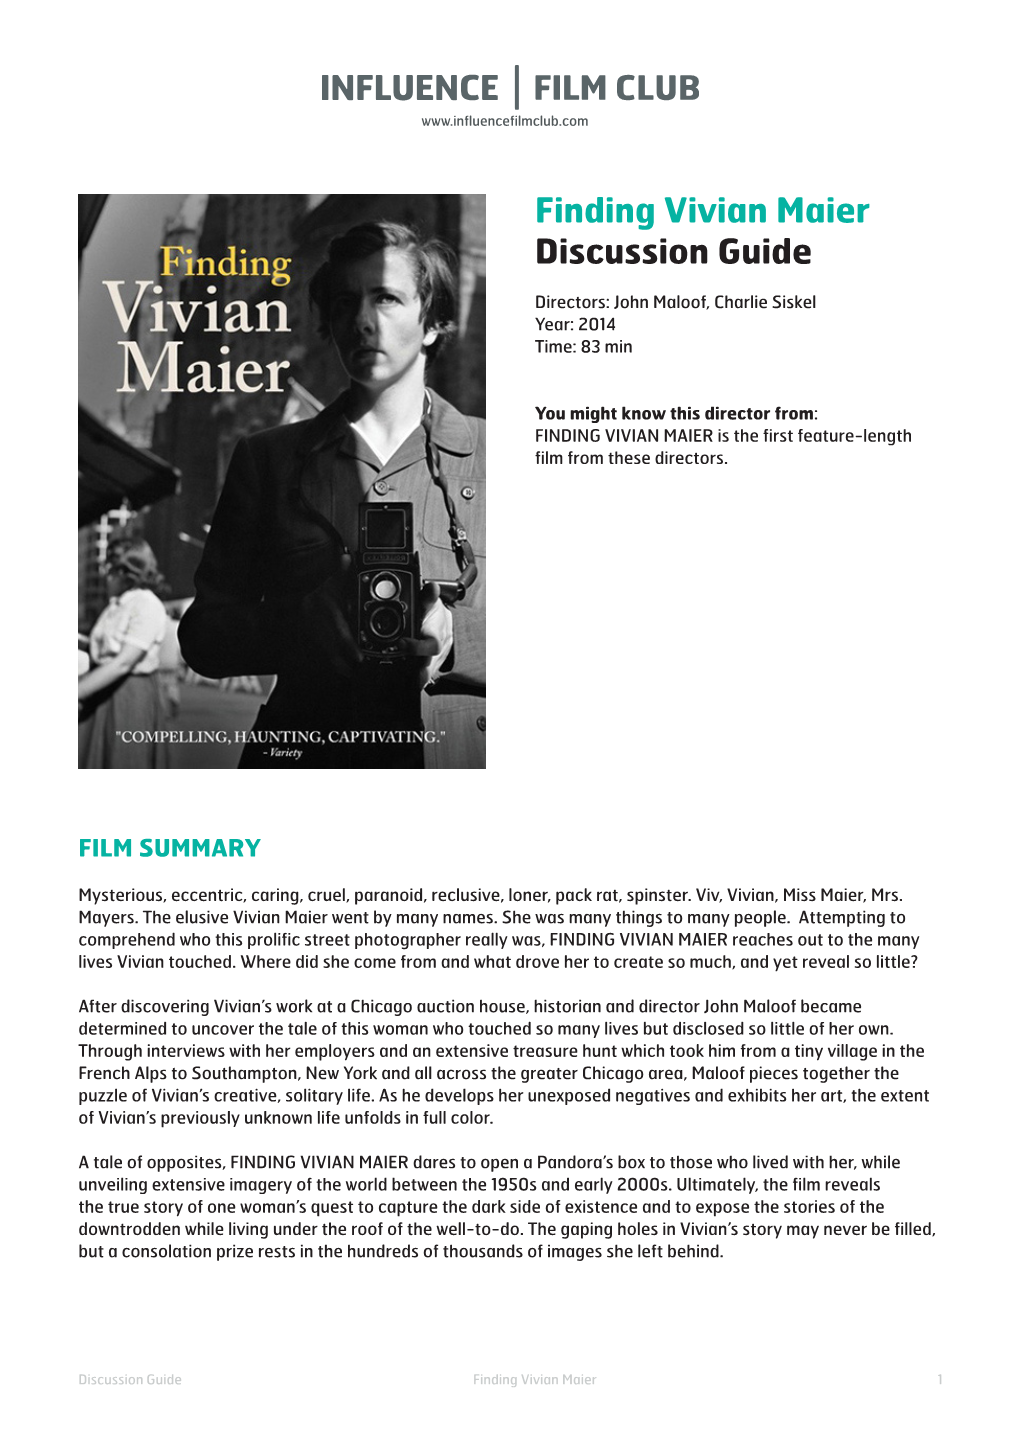 Finding Vivian Maier Discussion Guide